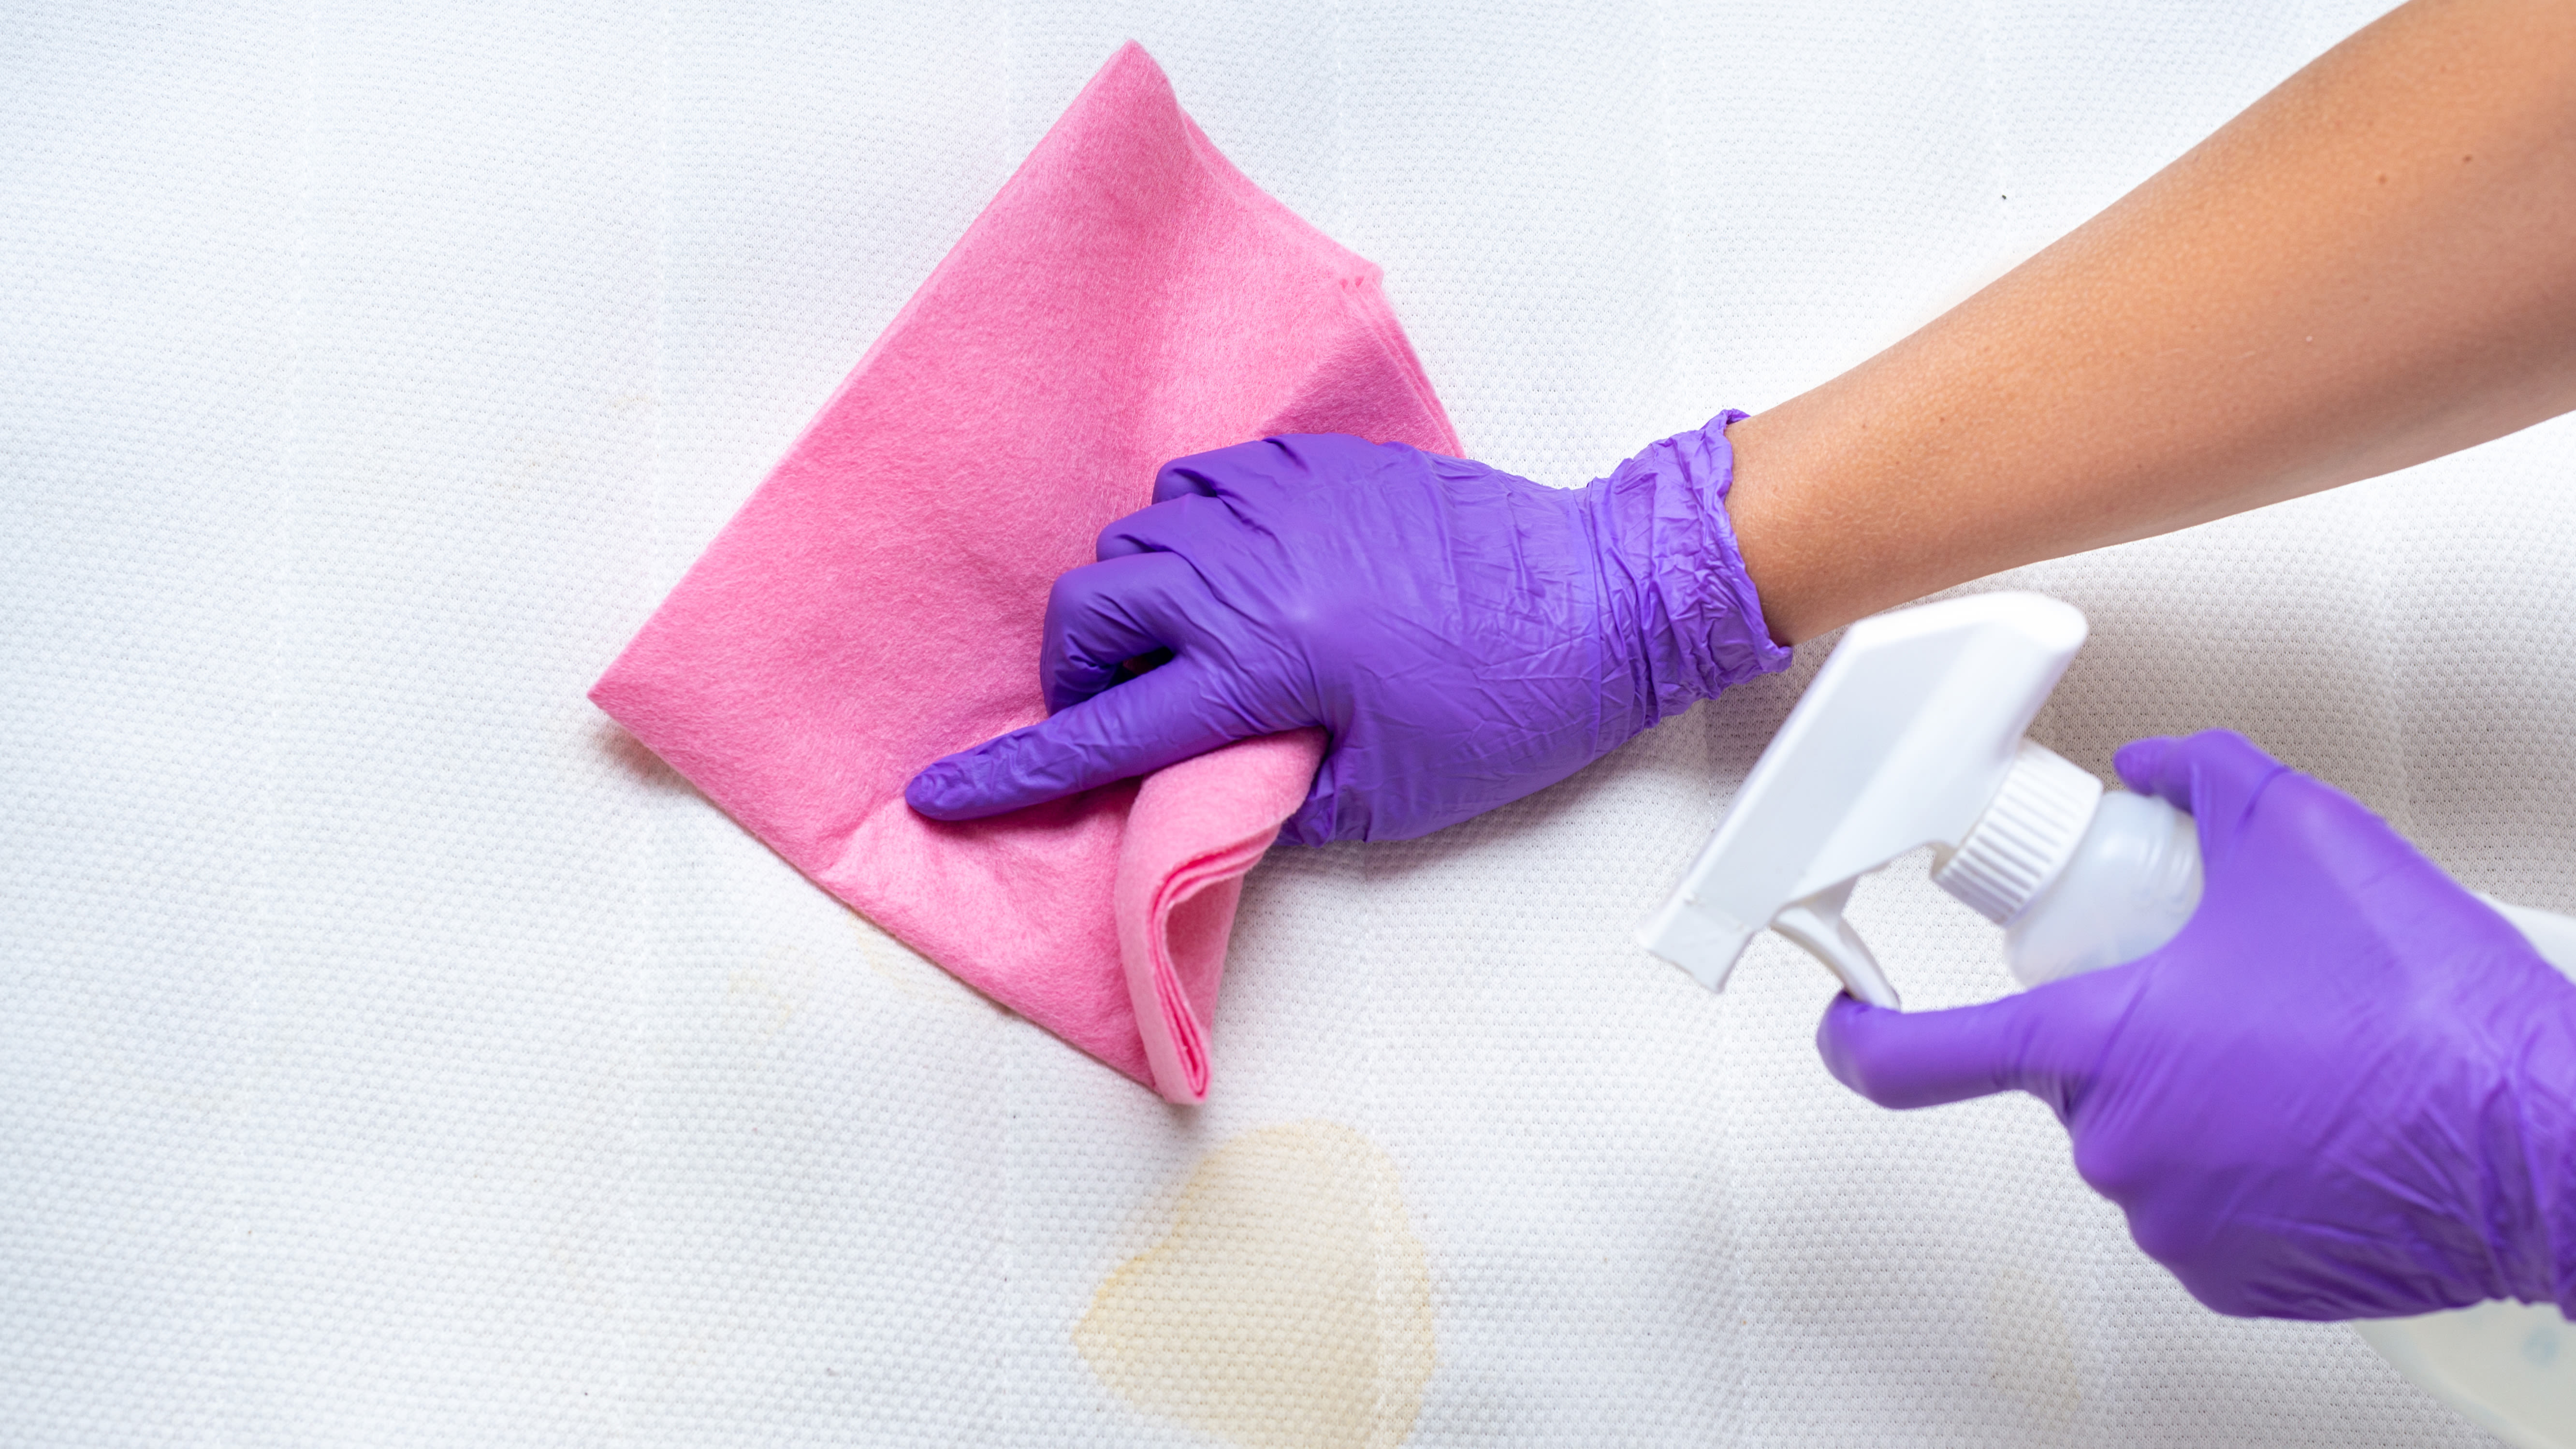 I test mattress cleaning hacks — here's the homemade stain remover I swear by